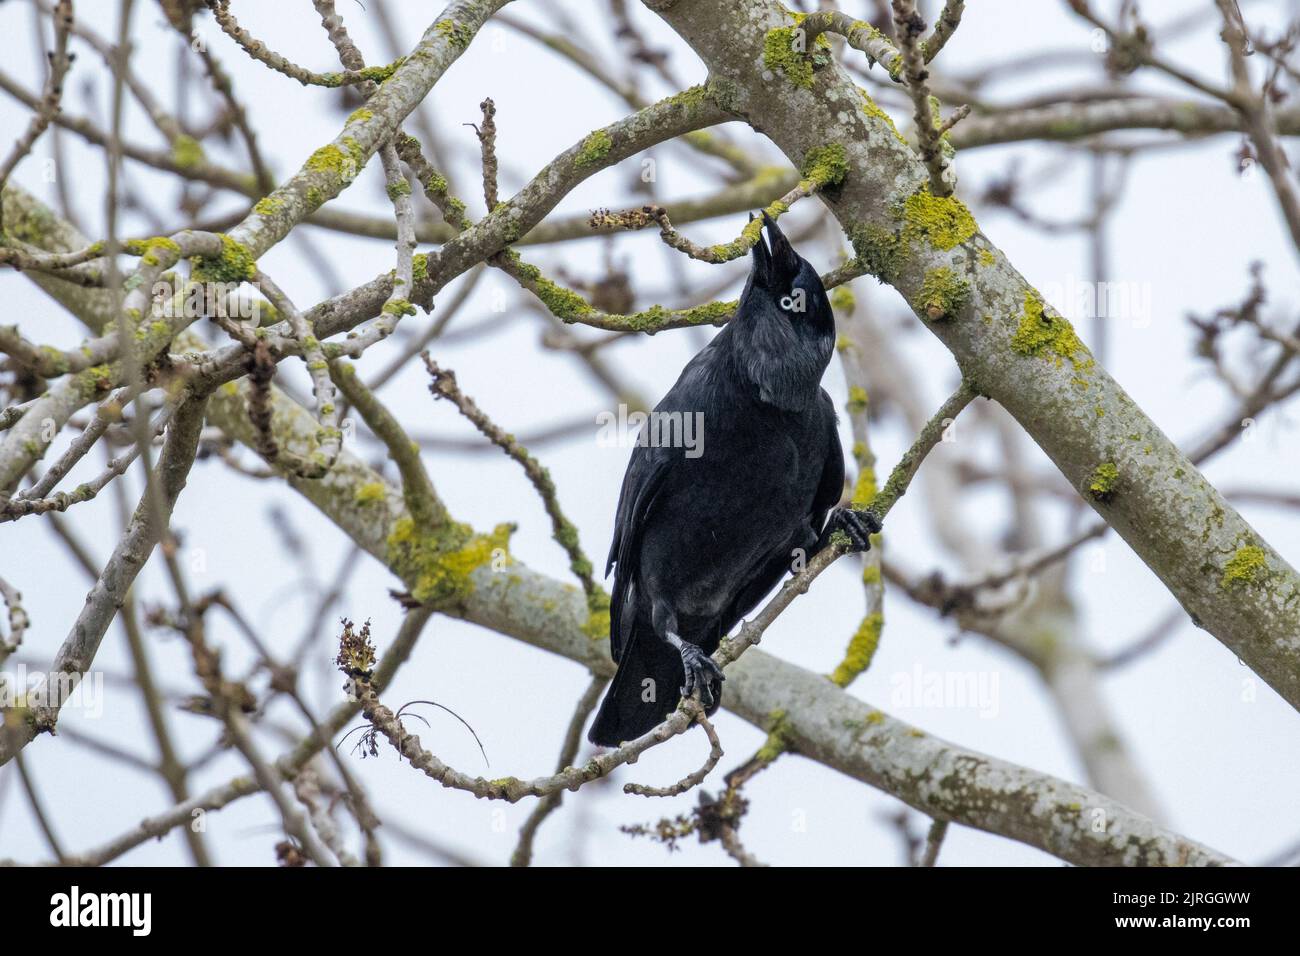 Jackdaw (Corvus monedula) in a tree, snapping off twigs for nest building, Yorkshire, UK wildlife Stock Photo